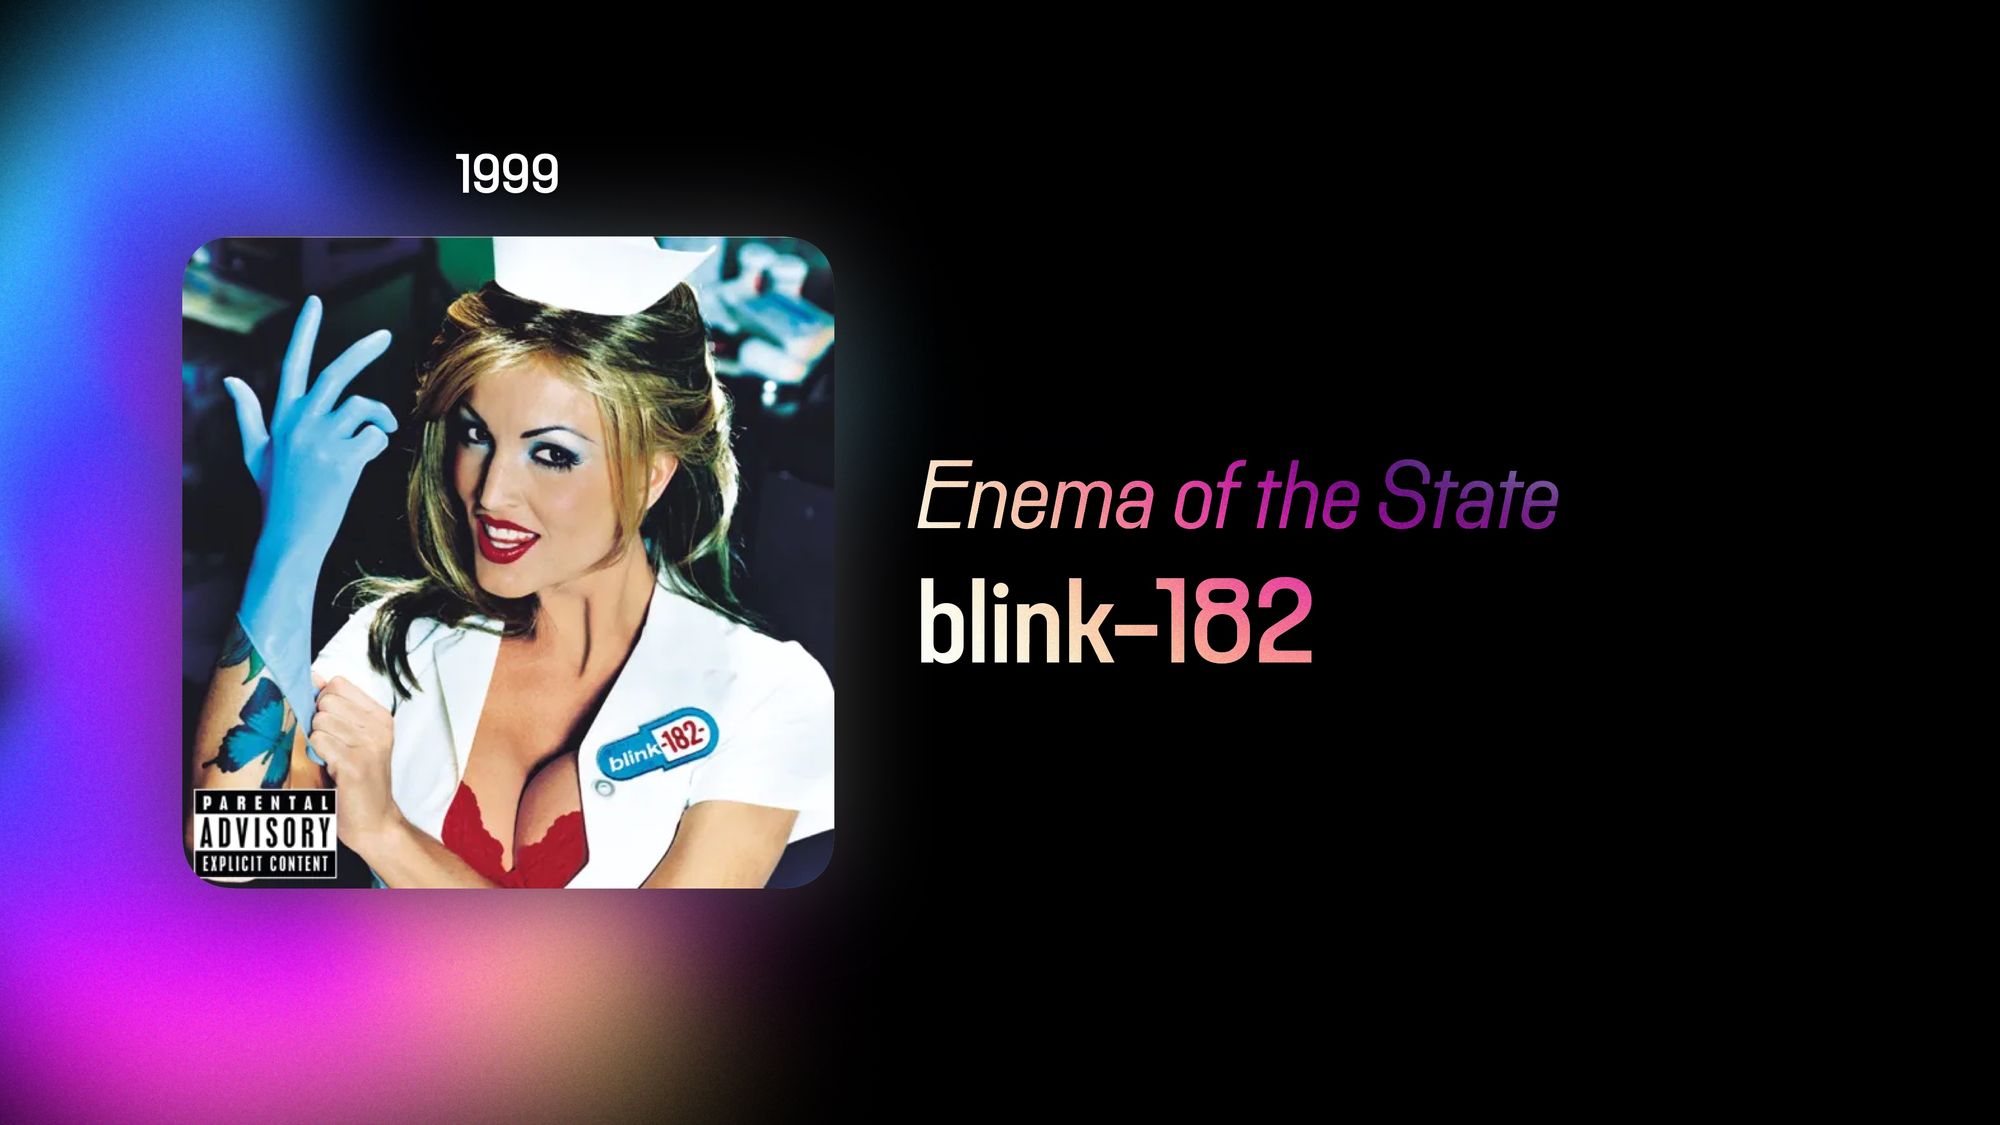 Enema of the State (365 Albums)